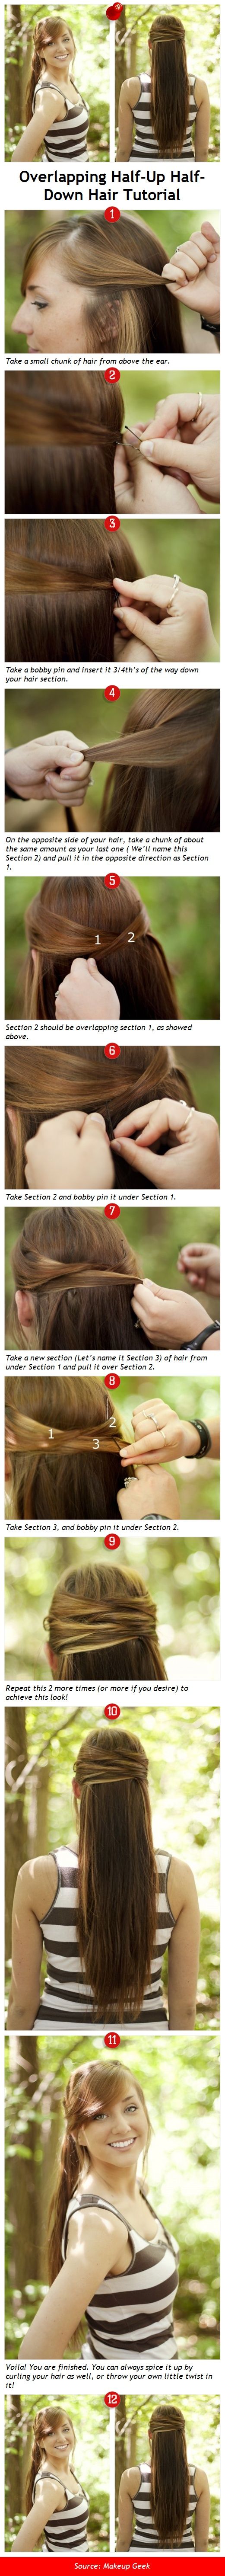 Overlapping Half Up Half Down Hairstyle Tutorial